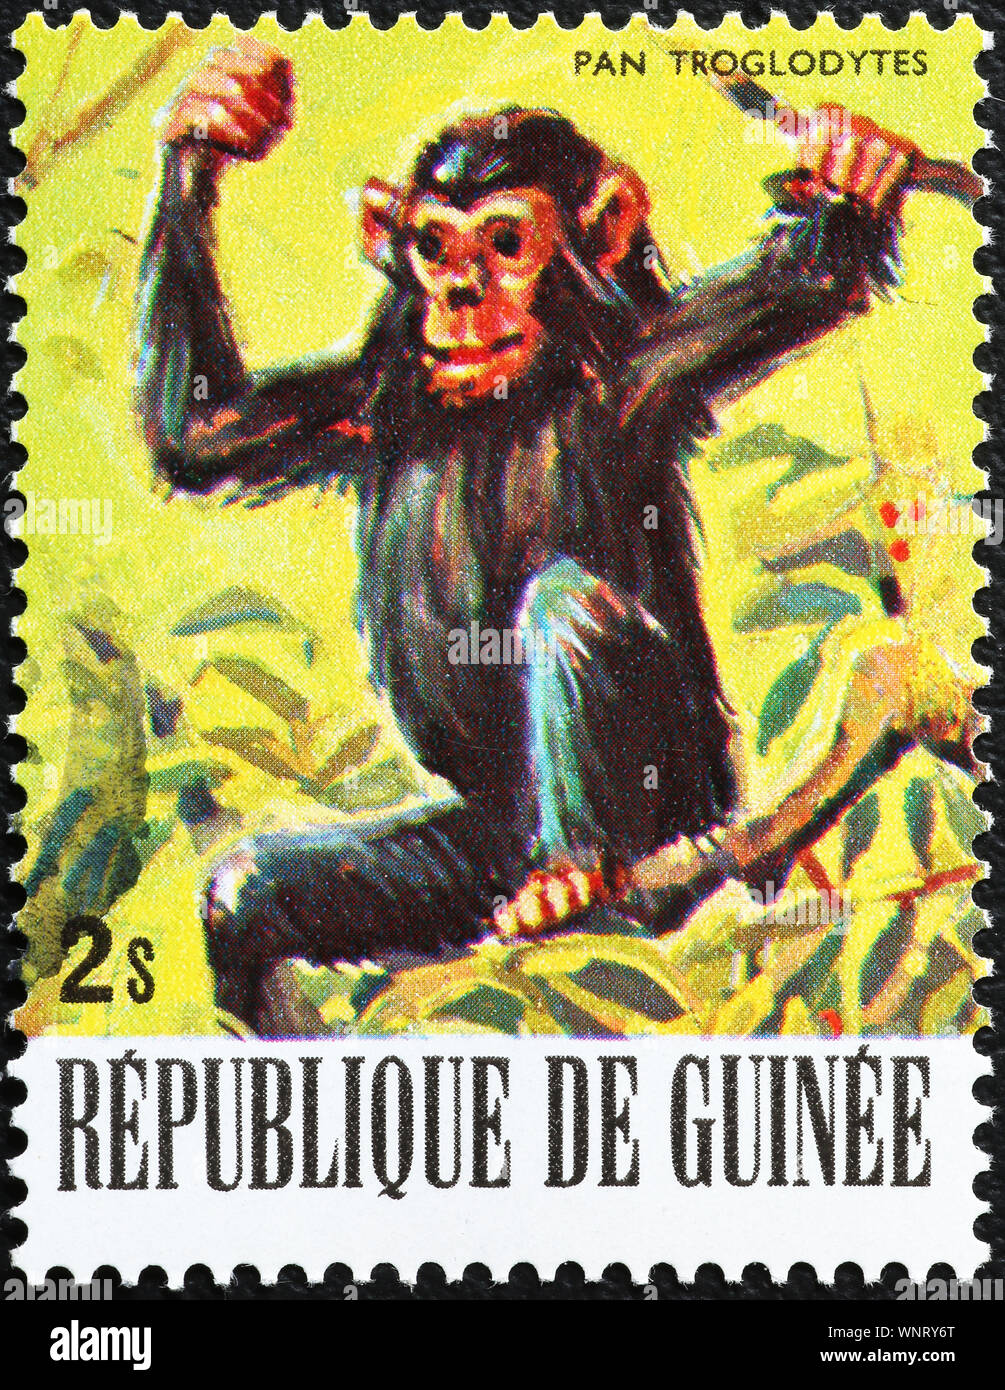 Small chimp on postage stamp of Guinea Stock Photo